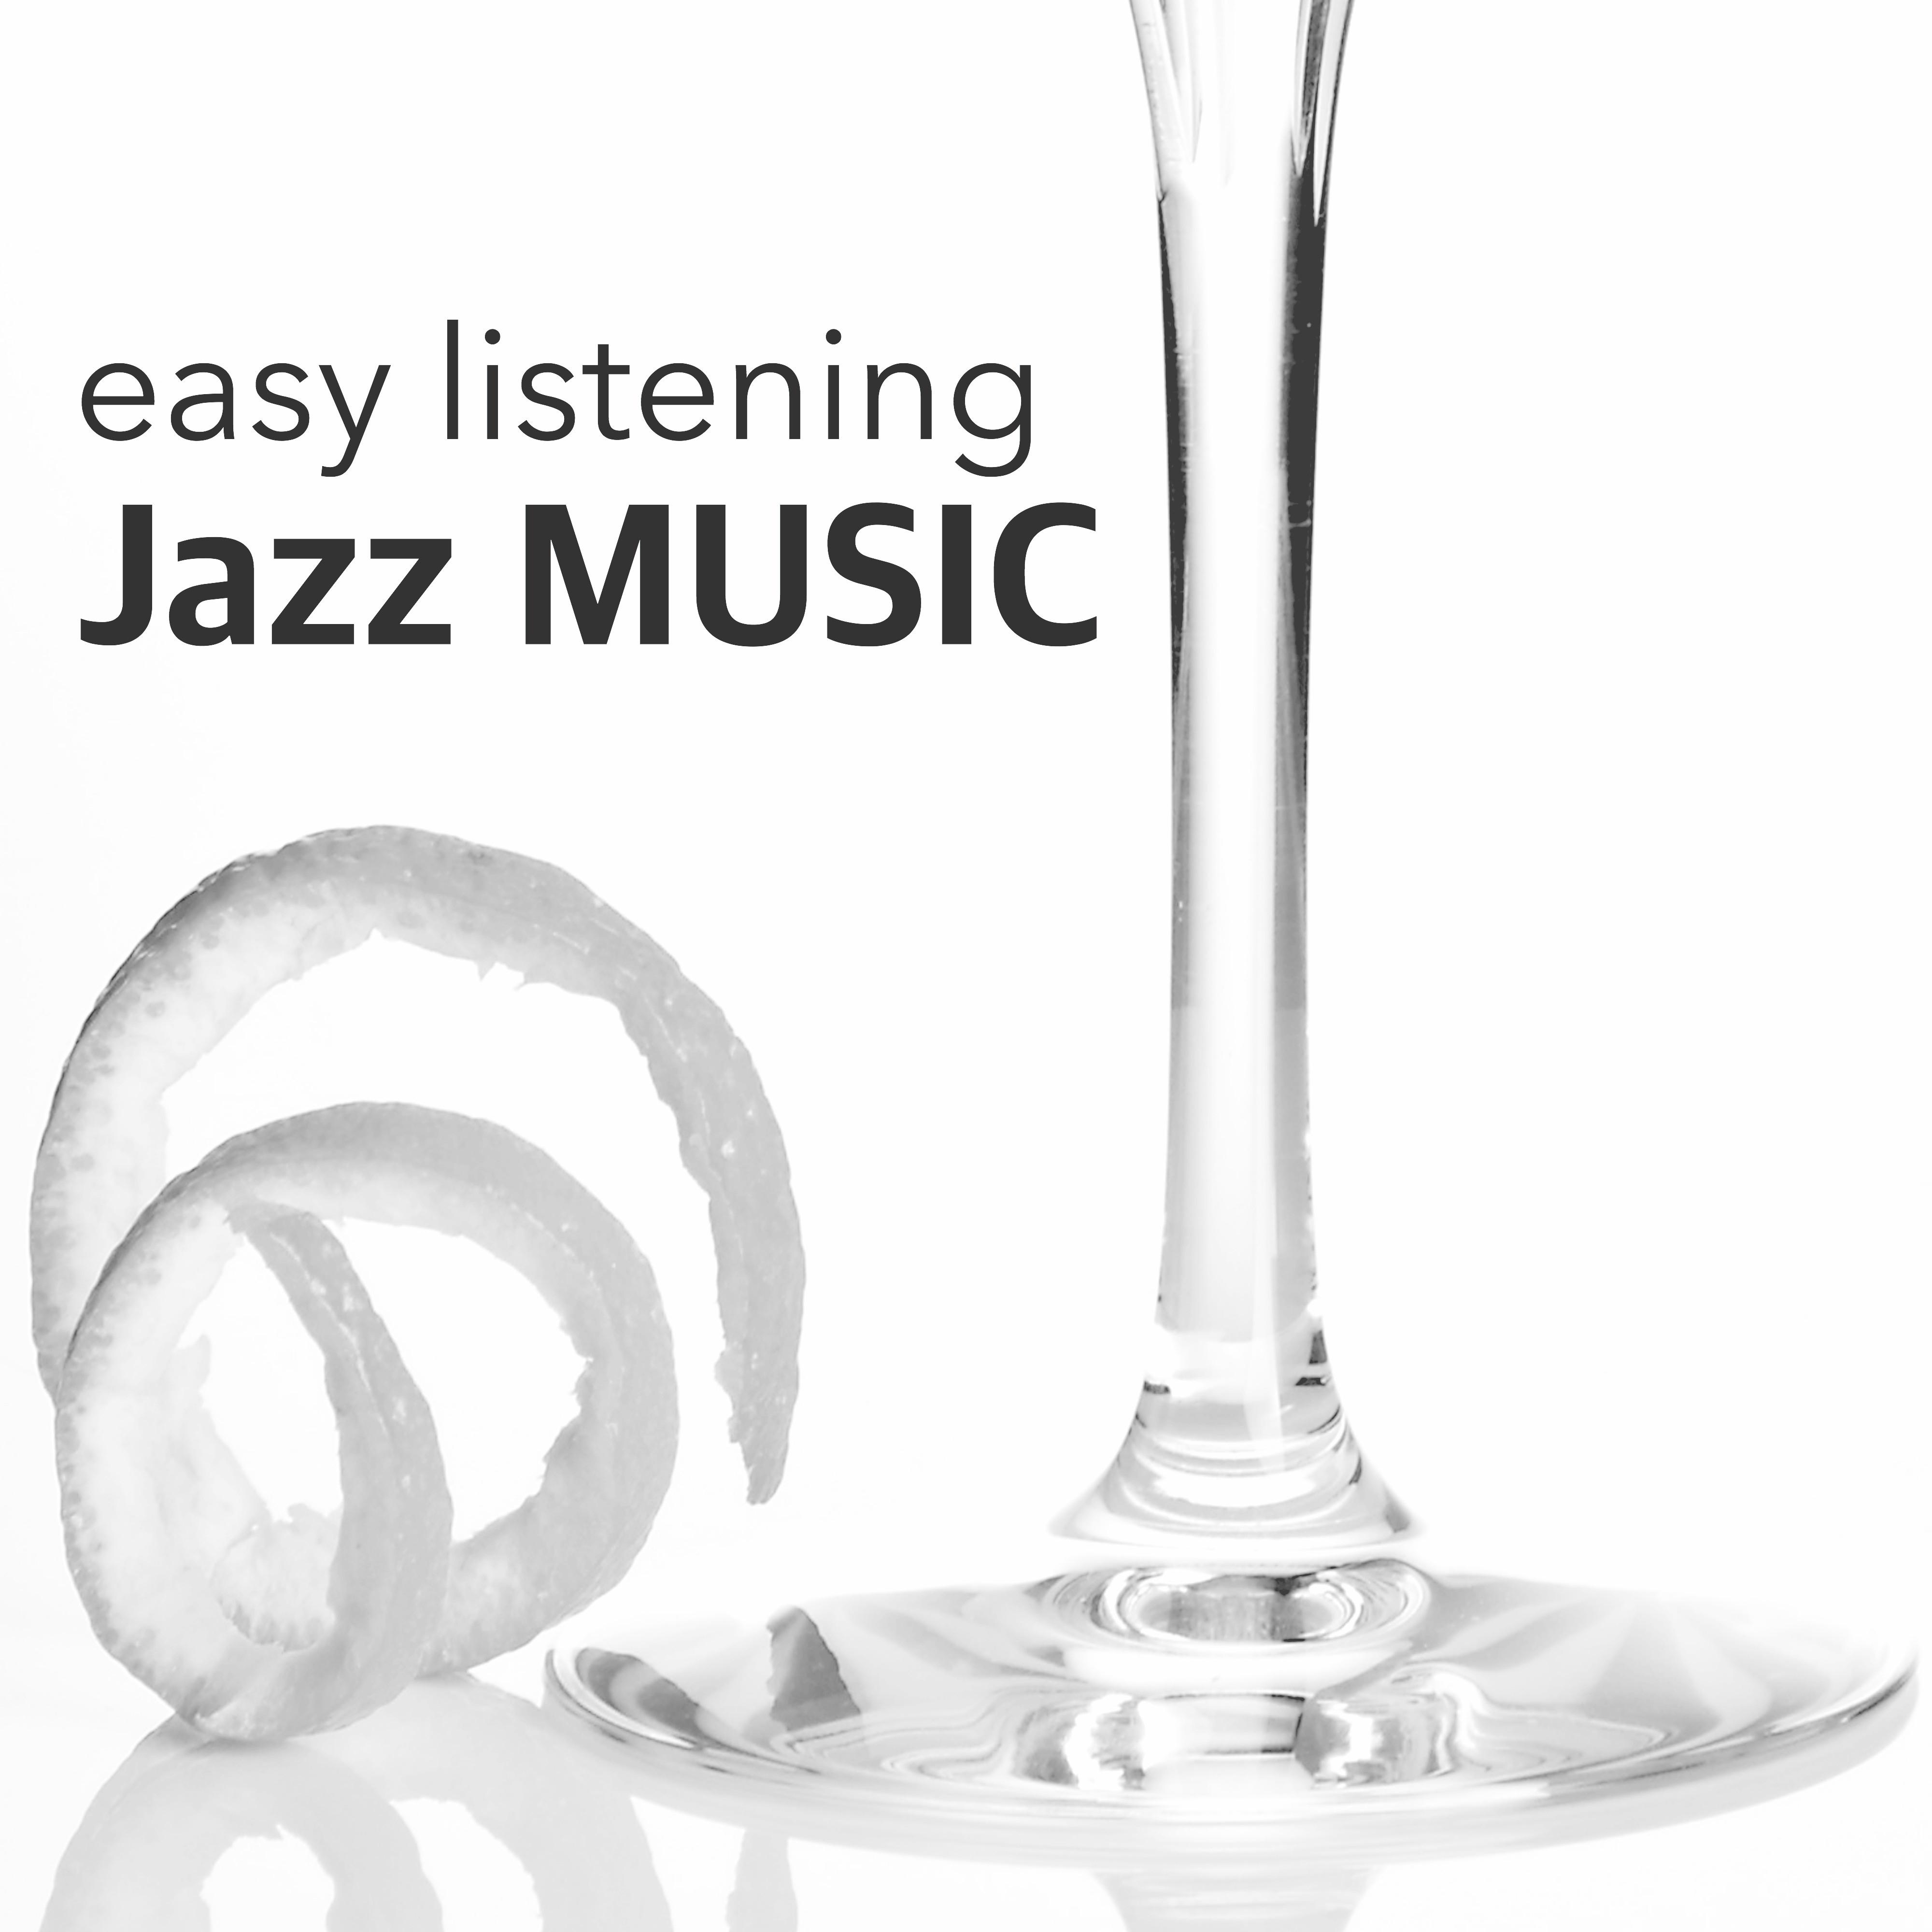 Easy Listening Jazz Music – Sax, Piano and Guitar, Calming Jazz Music, Chill Out Music Collection